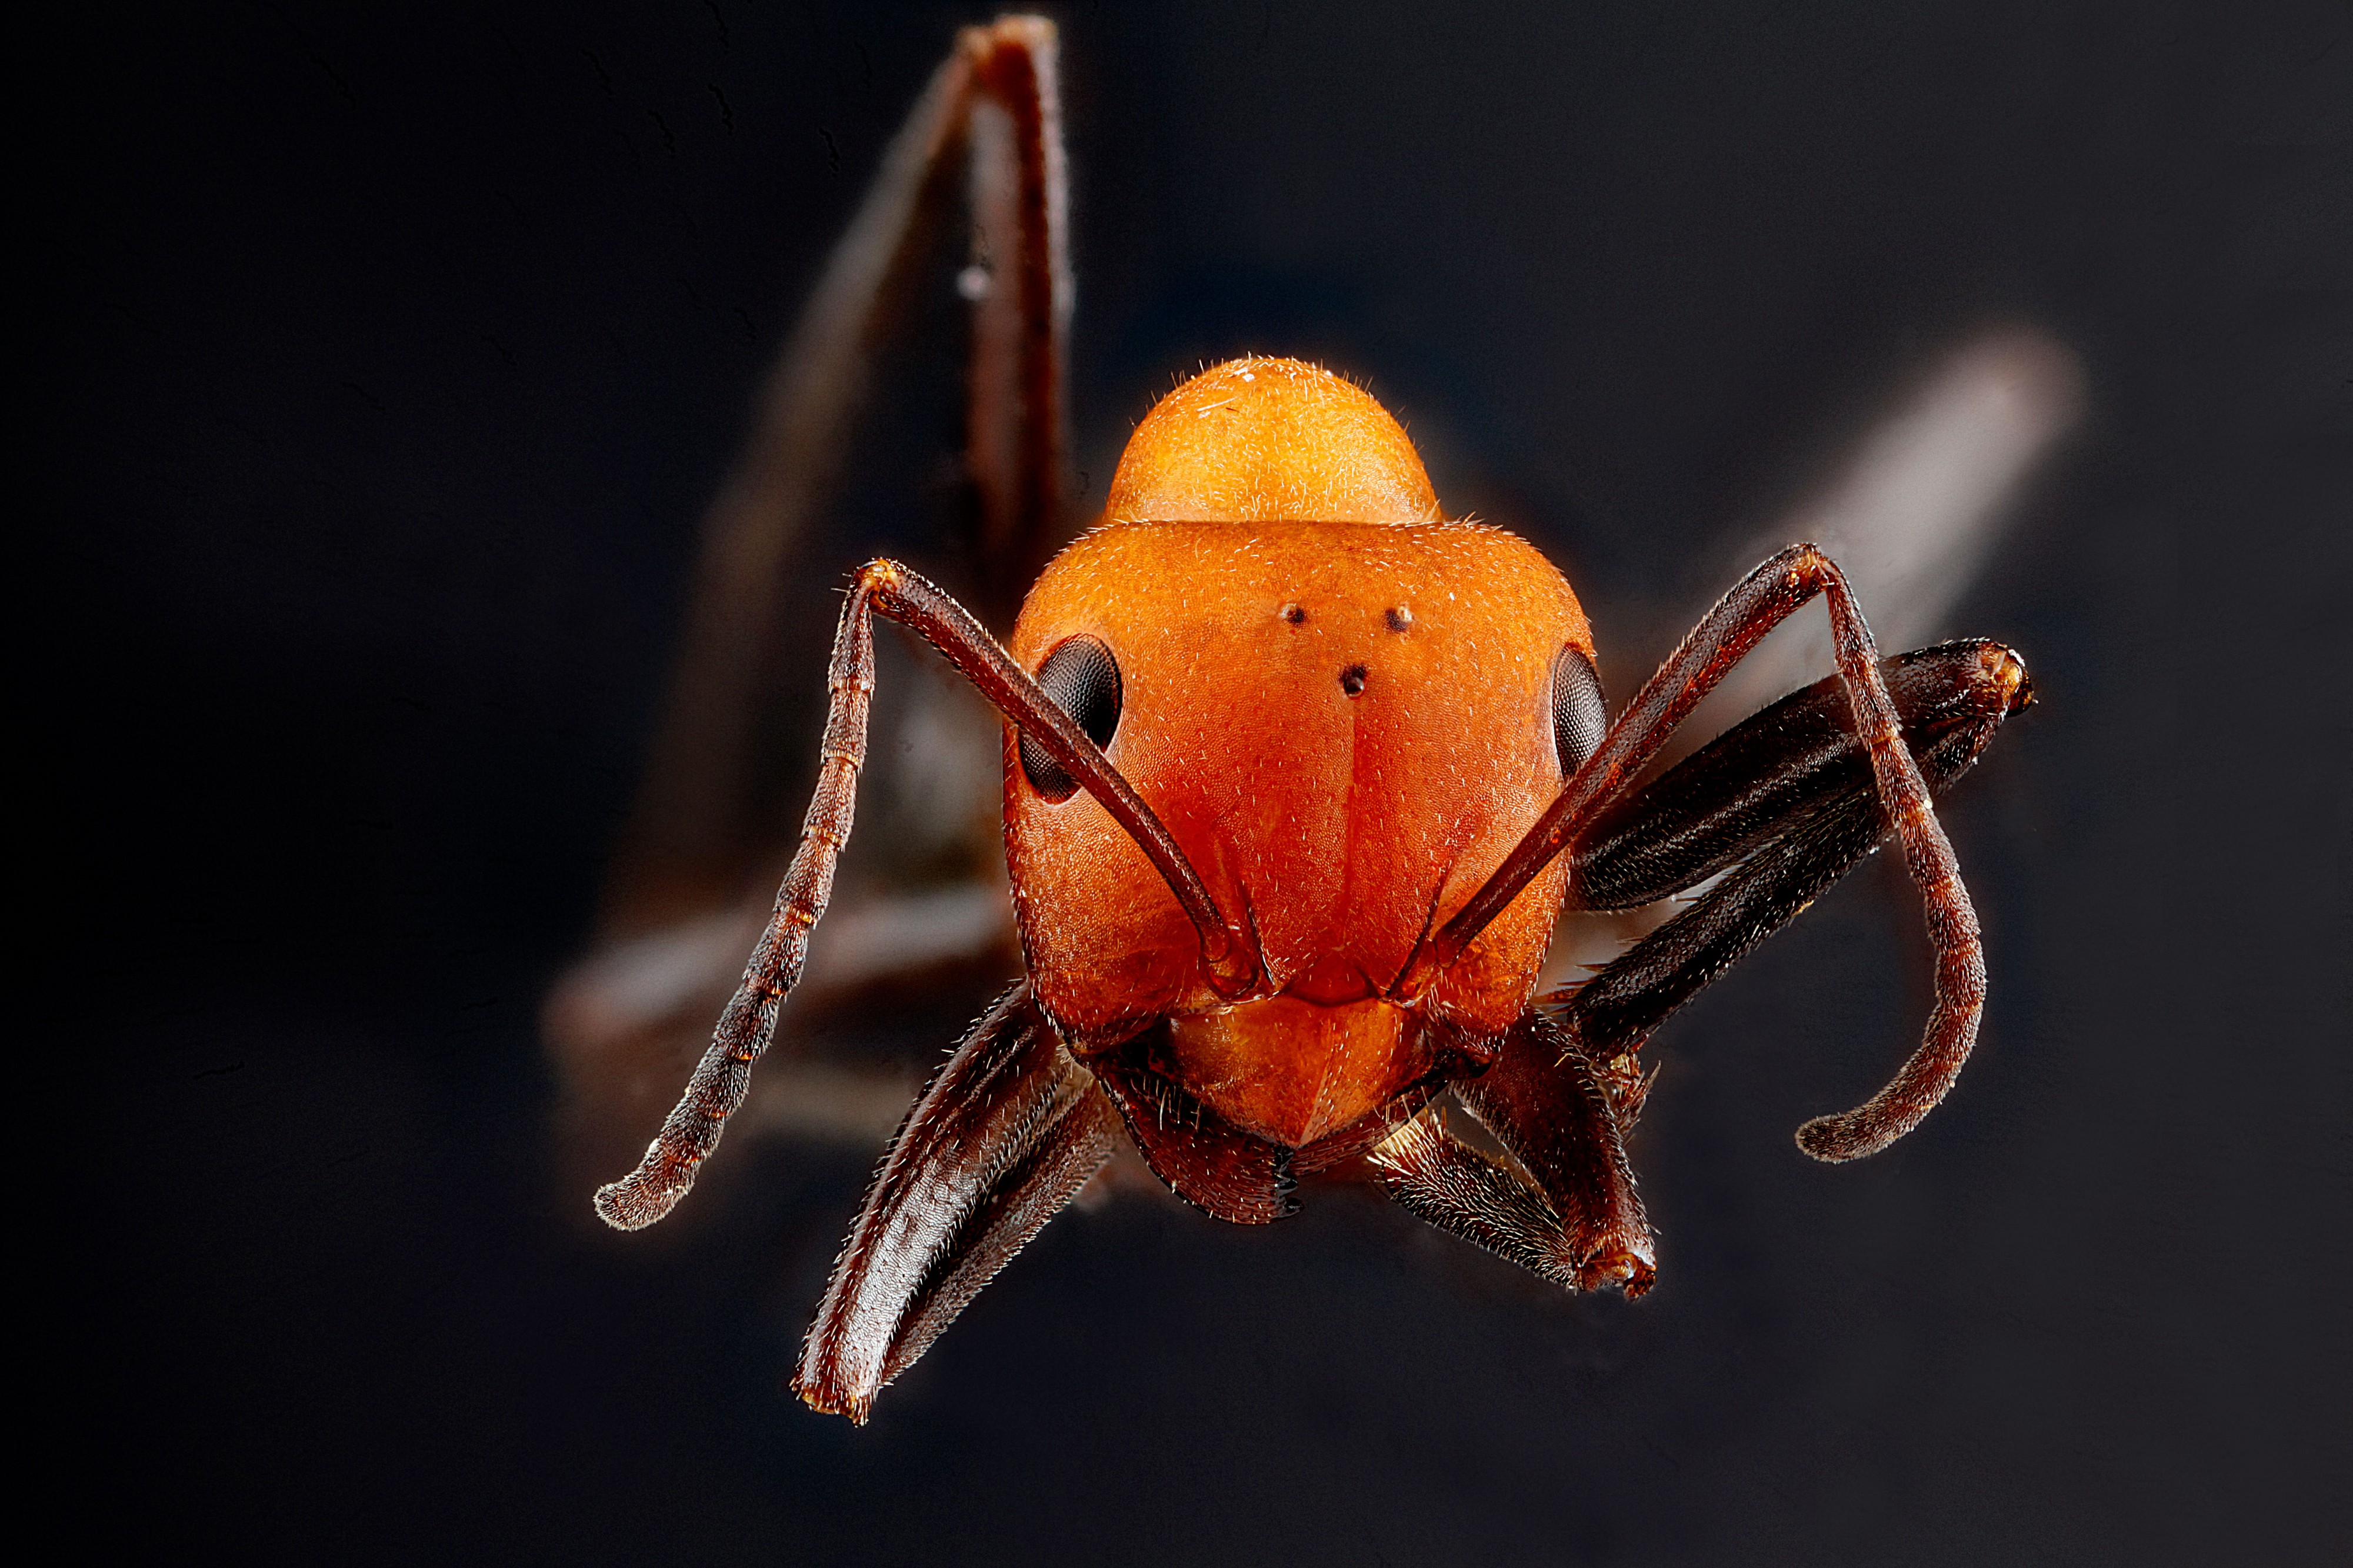 Ant,-face 2012-07-30-17.18.42-ZS-PMax (7693184158)